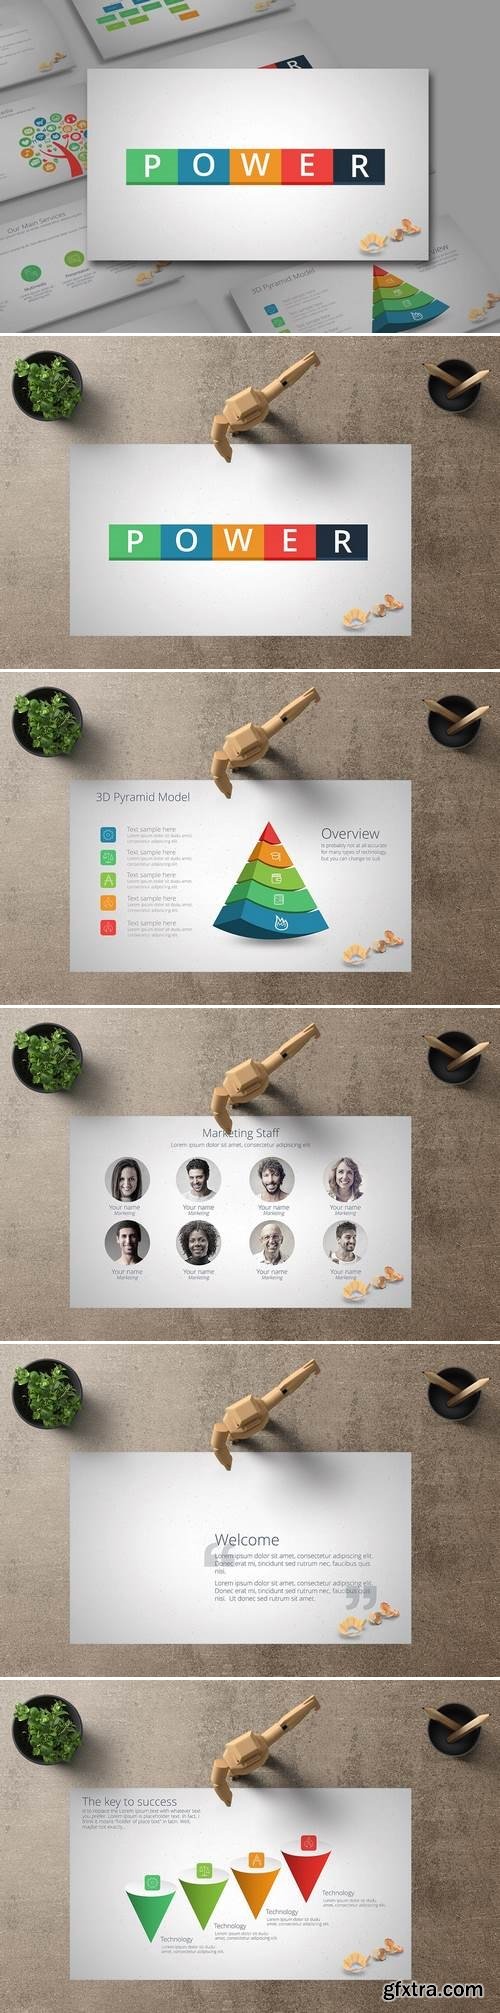 POWER Powerpoint Template